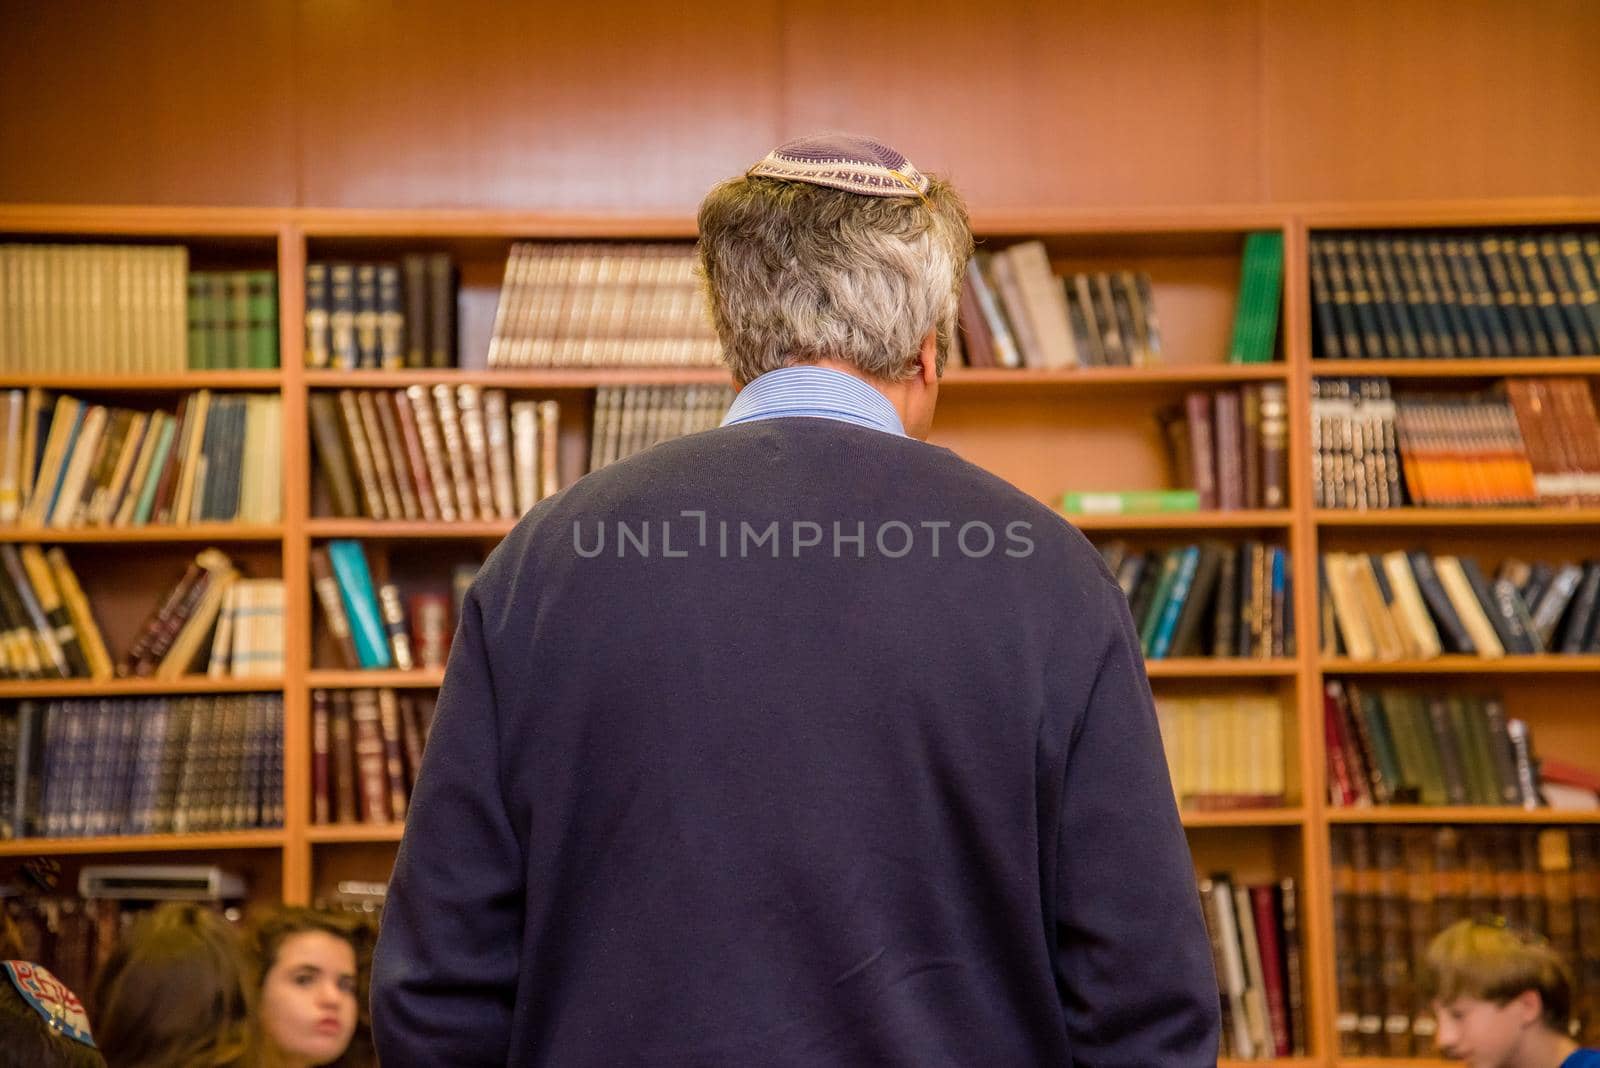 Old Jewish man with gray hair wearing a yarmulke from the back in a library of book shelves.